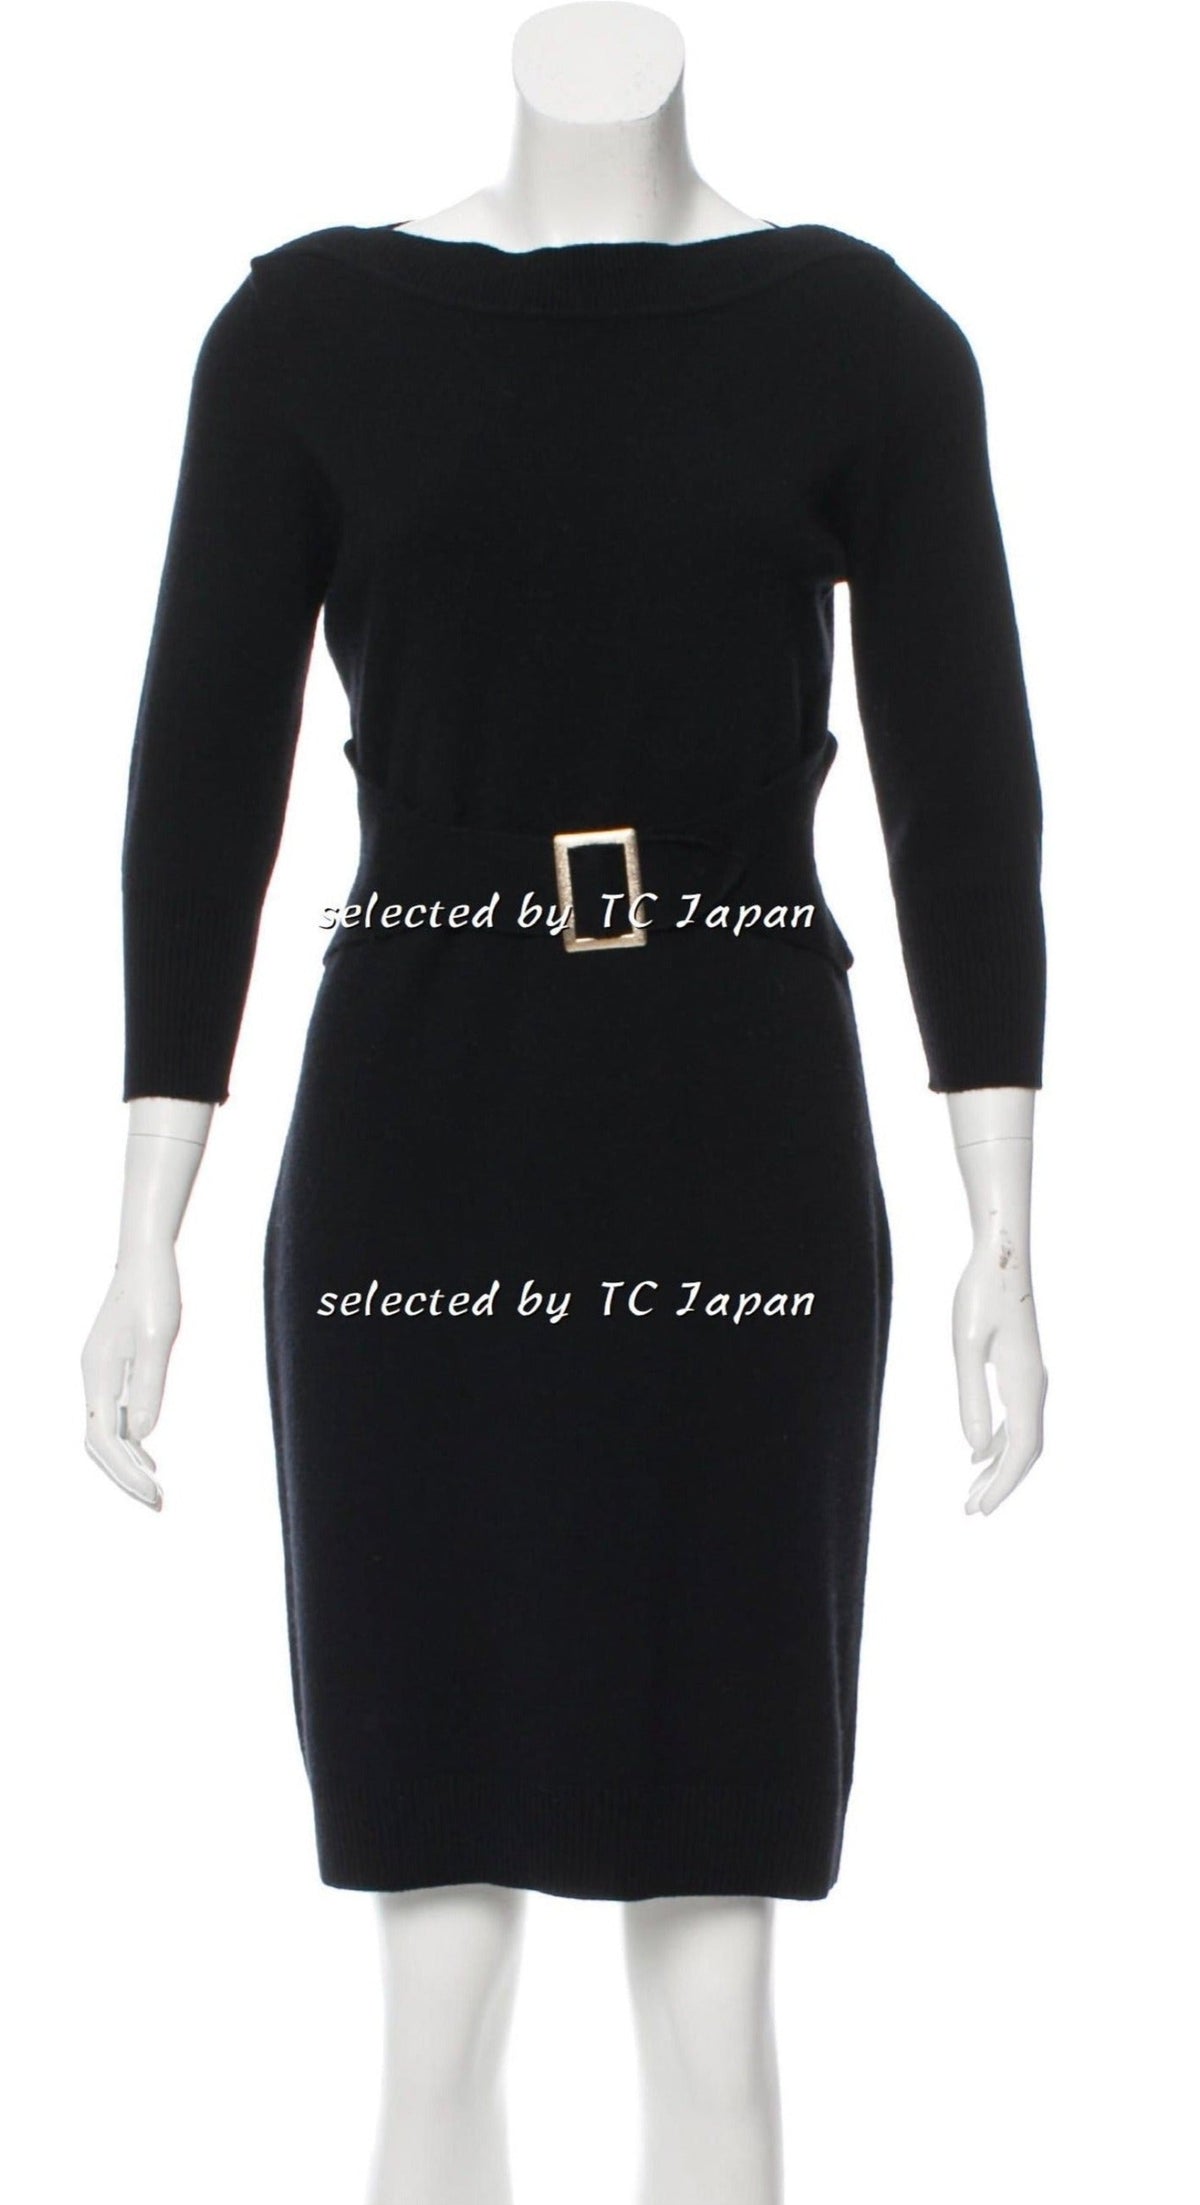 CHANEL 09A Black or Grey Belted Knit Wool Cashmere Dress 34 38 シャネル ウール・カシミア・ワンピース - CHANEL TC JAPAN